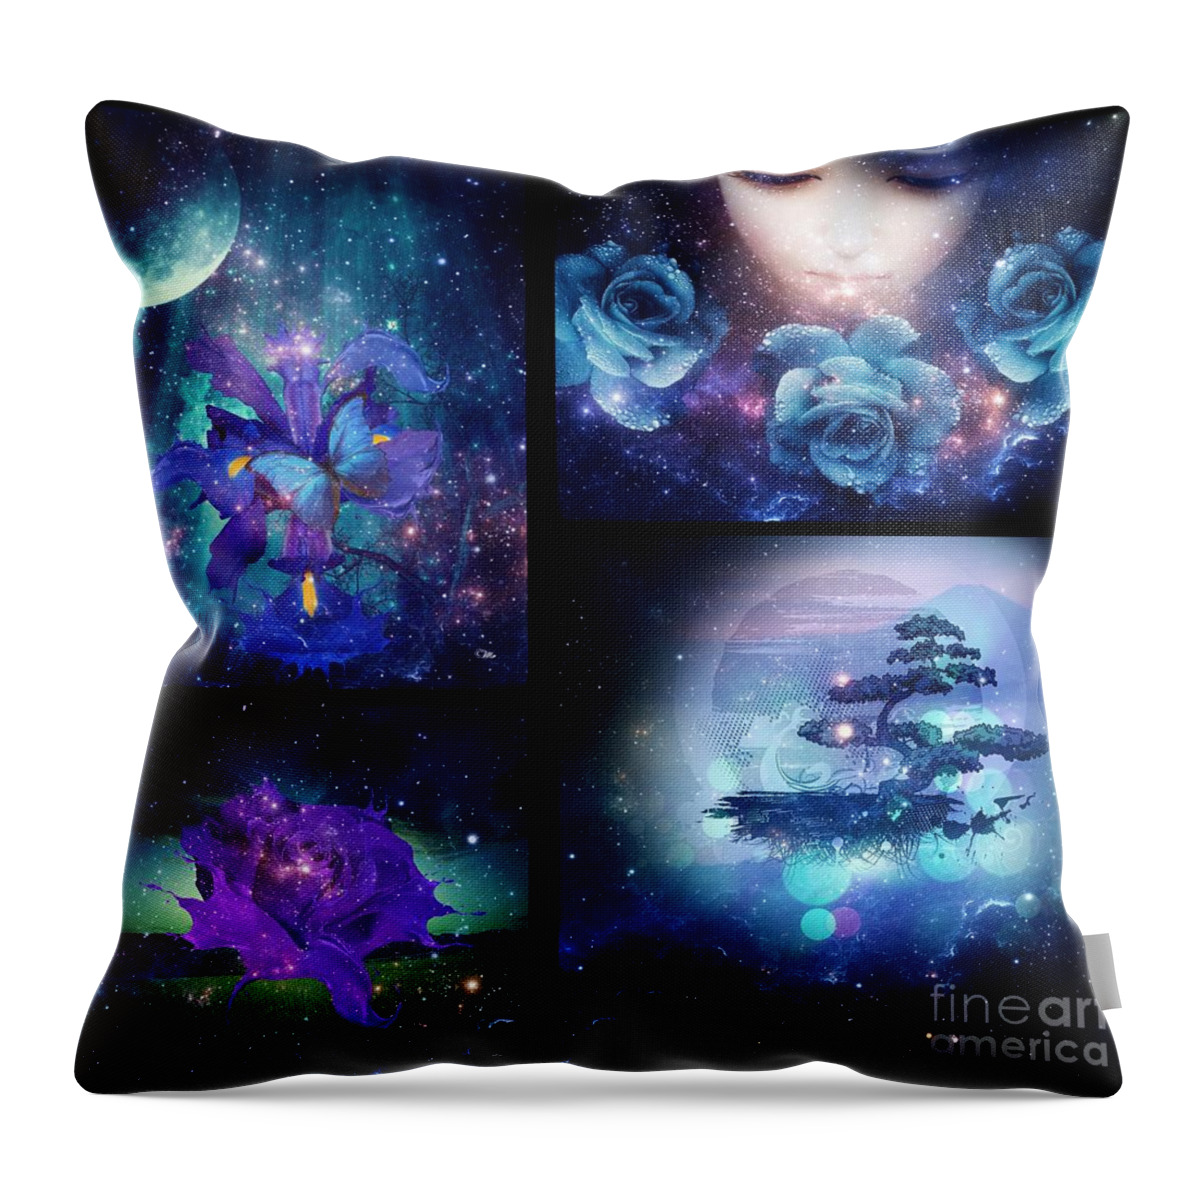 Among The Stars Throw Pillow featuring the digital art Among the Stars Series by Mo T